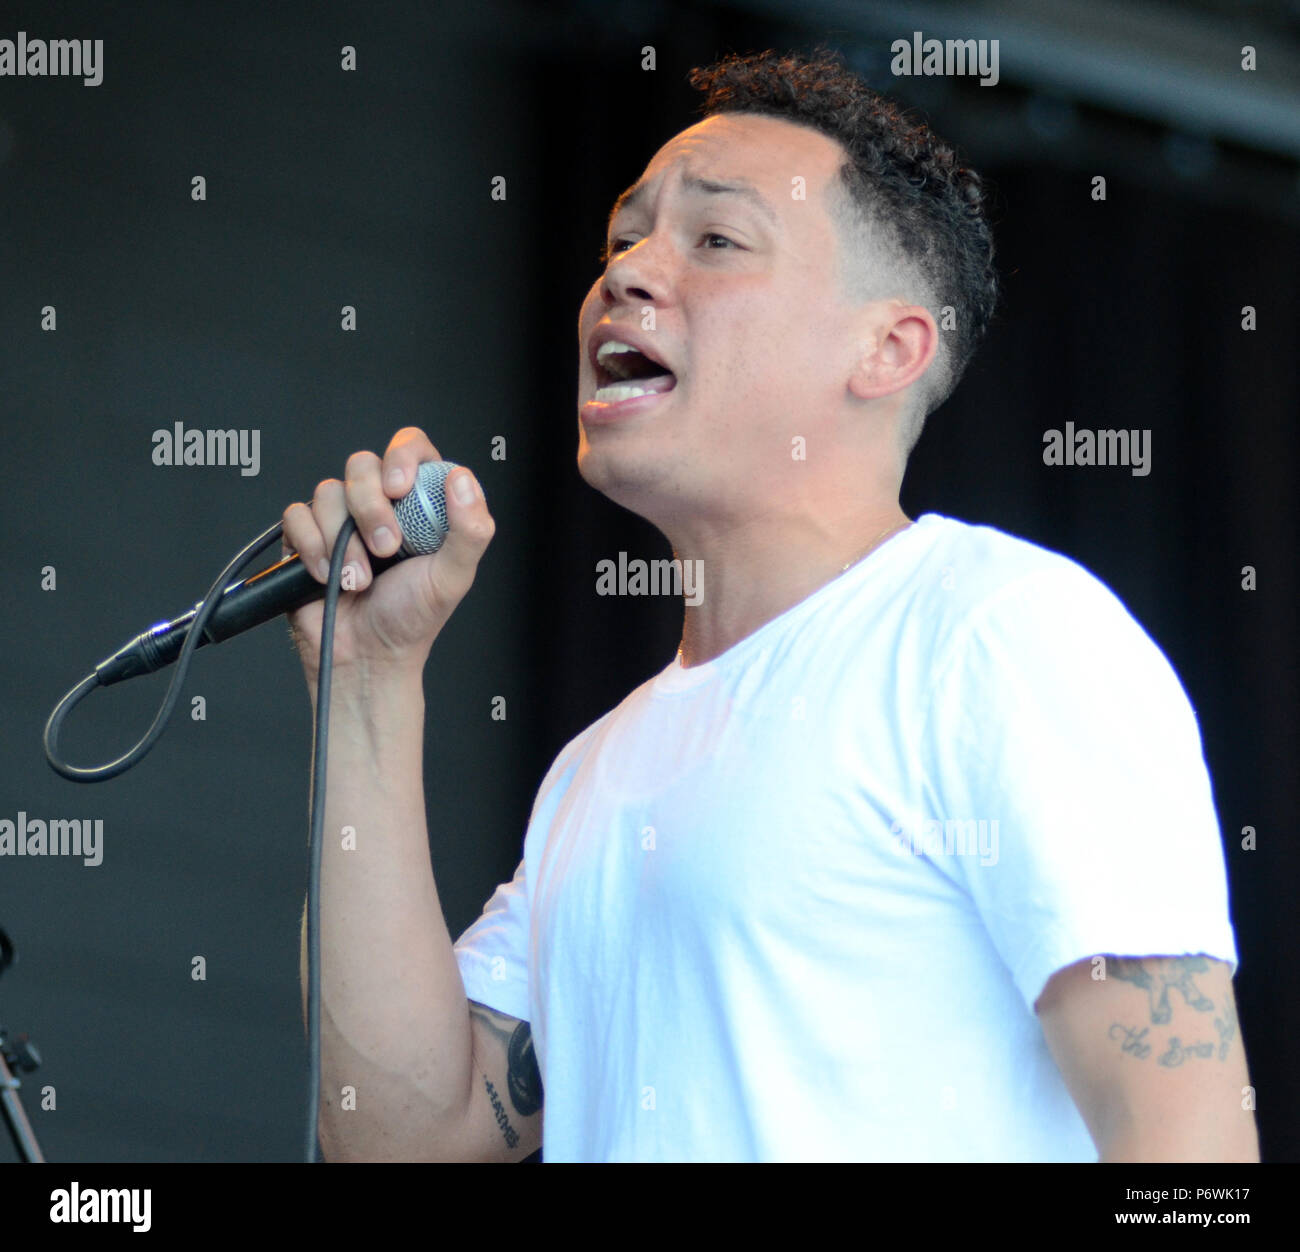 Milwaukee, Wisconsin, USA. 29th June, 2018. Lead singer Maceo Haymes of The O'My's performs live at Henry Maier Festival Park during Summerfest in Milwaukee, Wisconsin. Ricky Bassman/Cal Sport Media/Alamy Live News Stock Photo